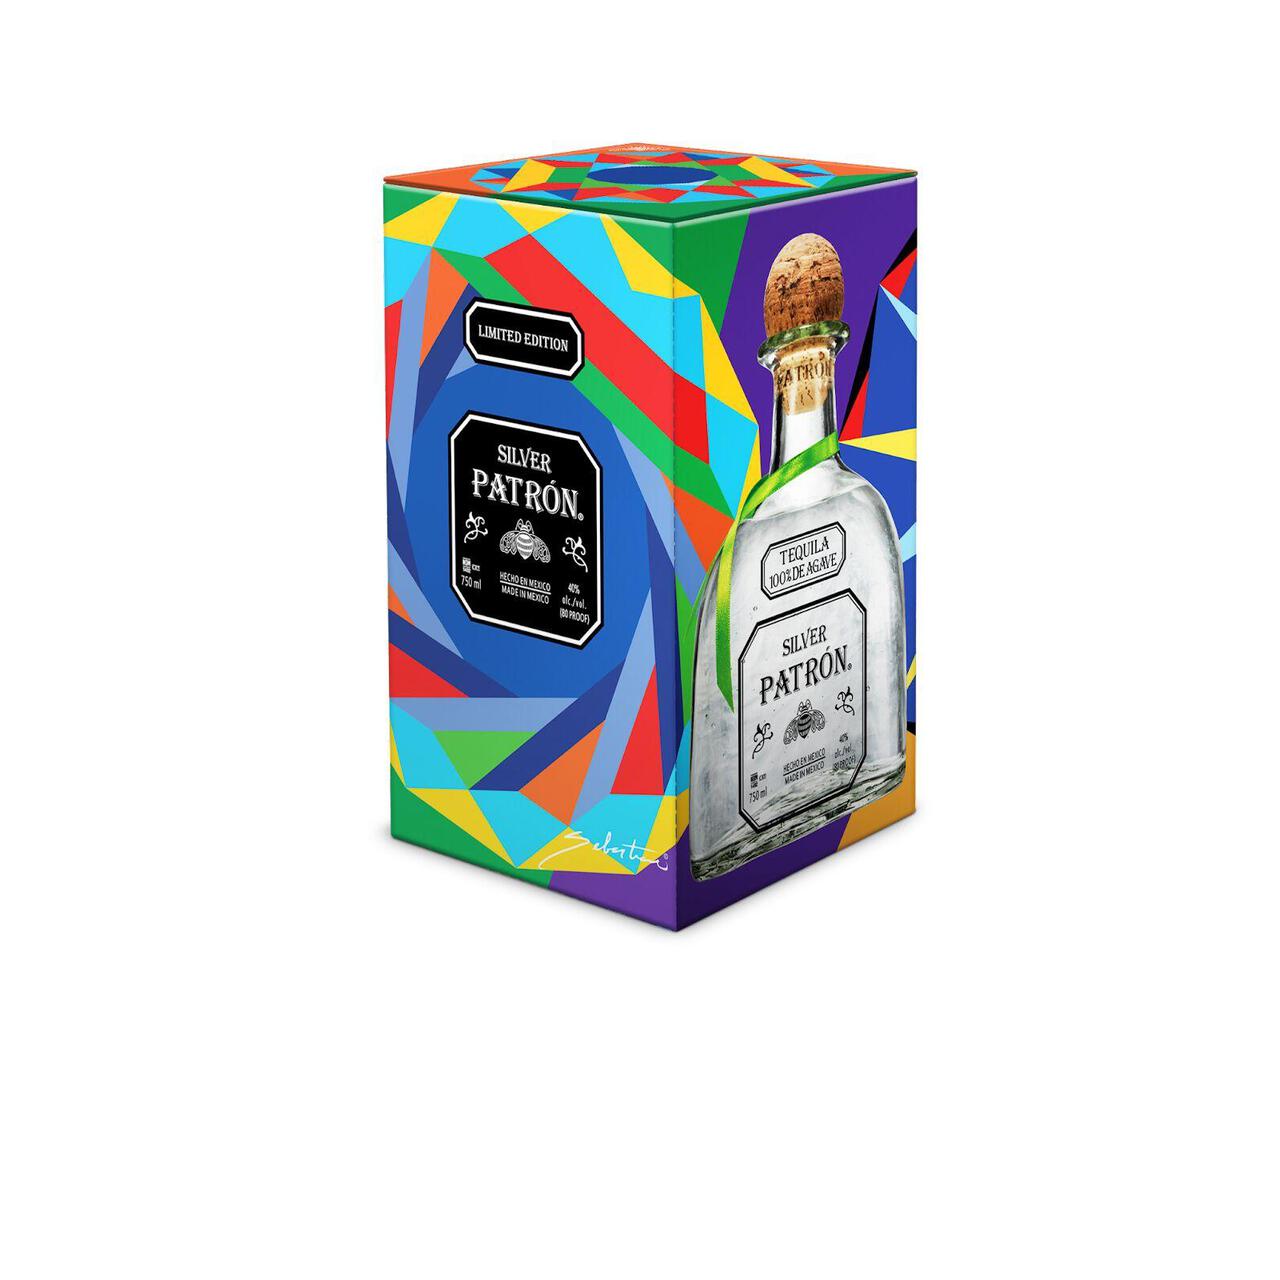 Patron Silver Tequila Gift Box 70cl